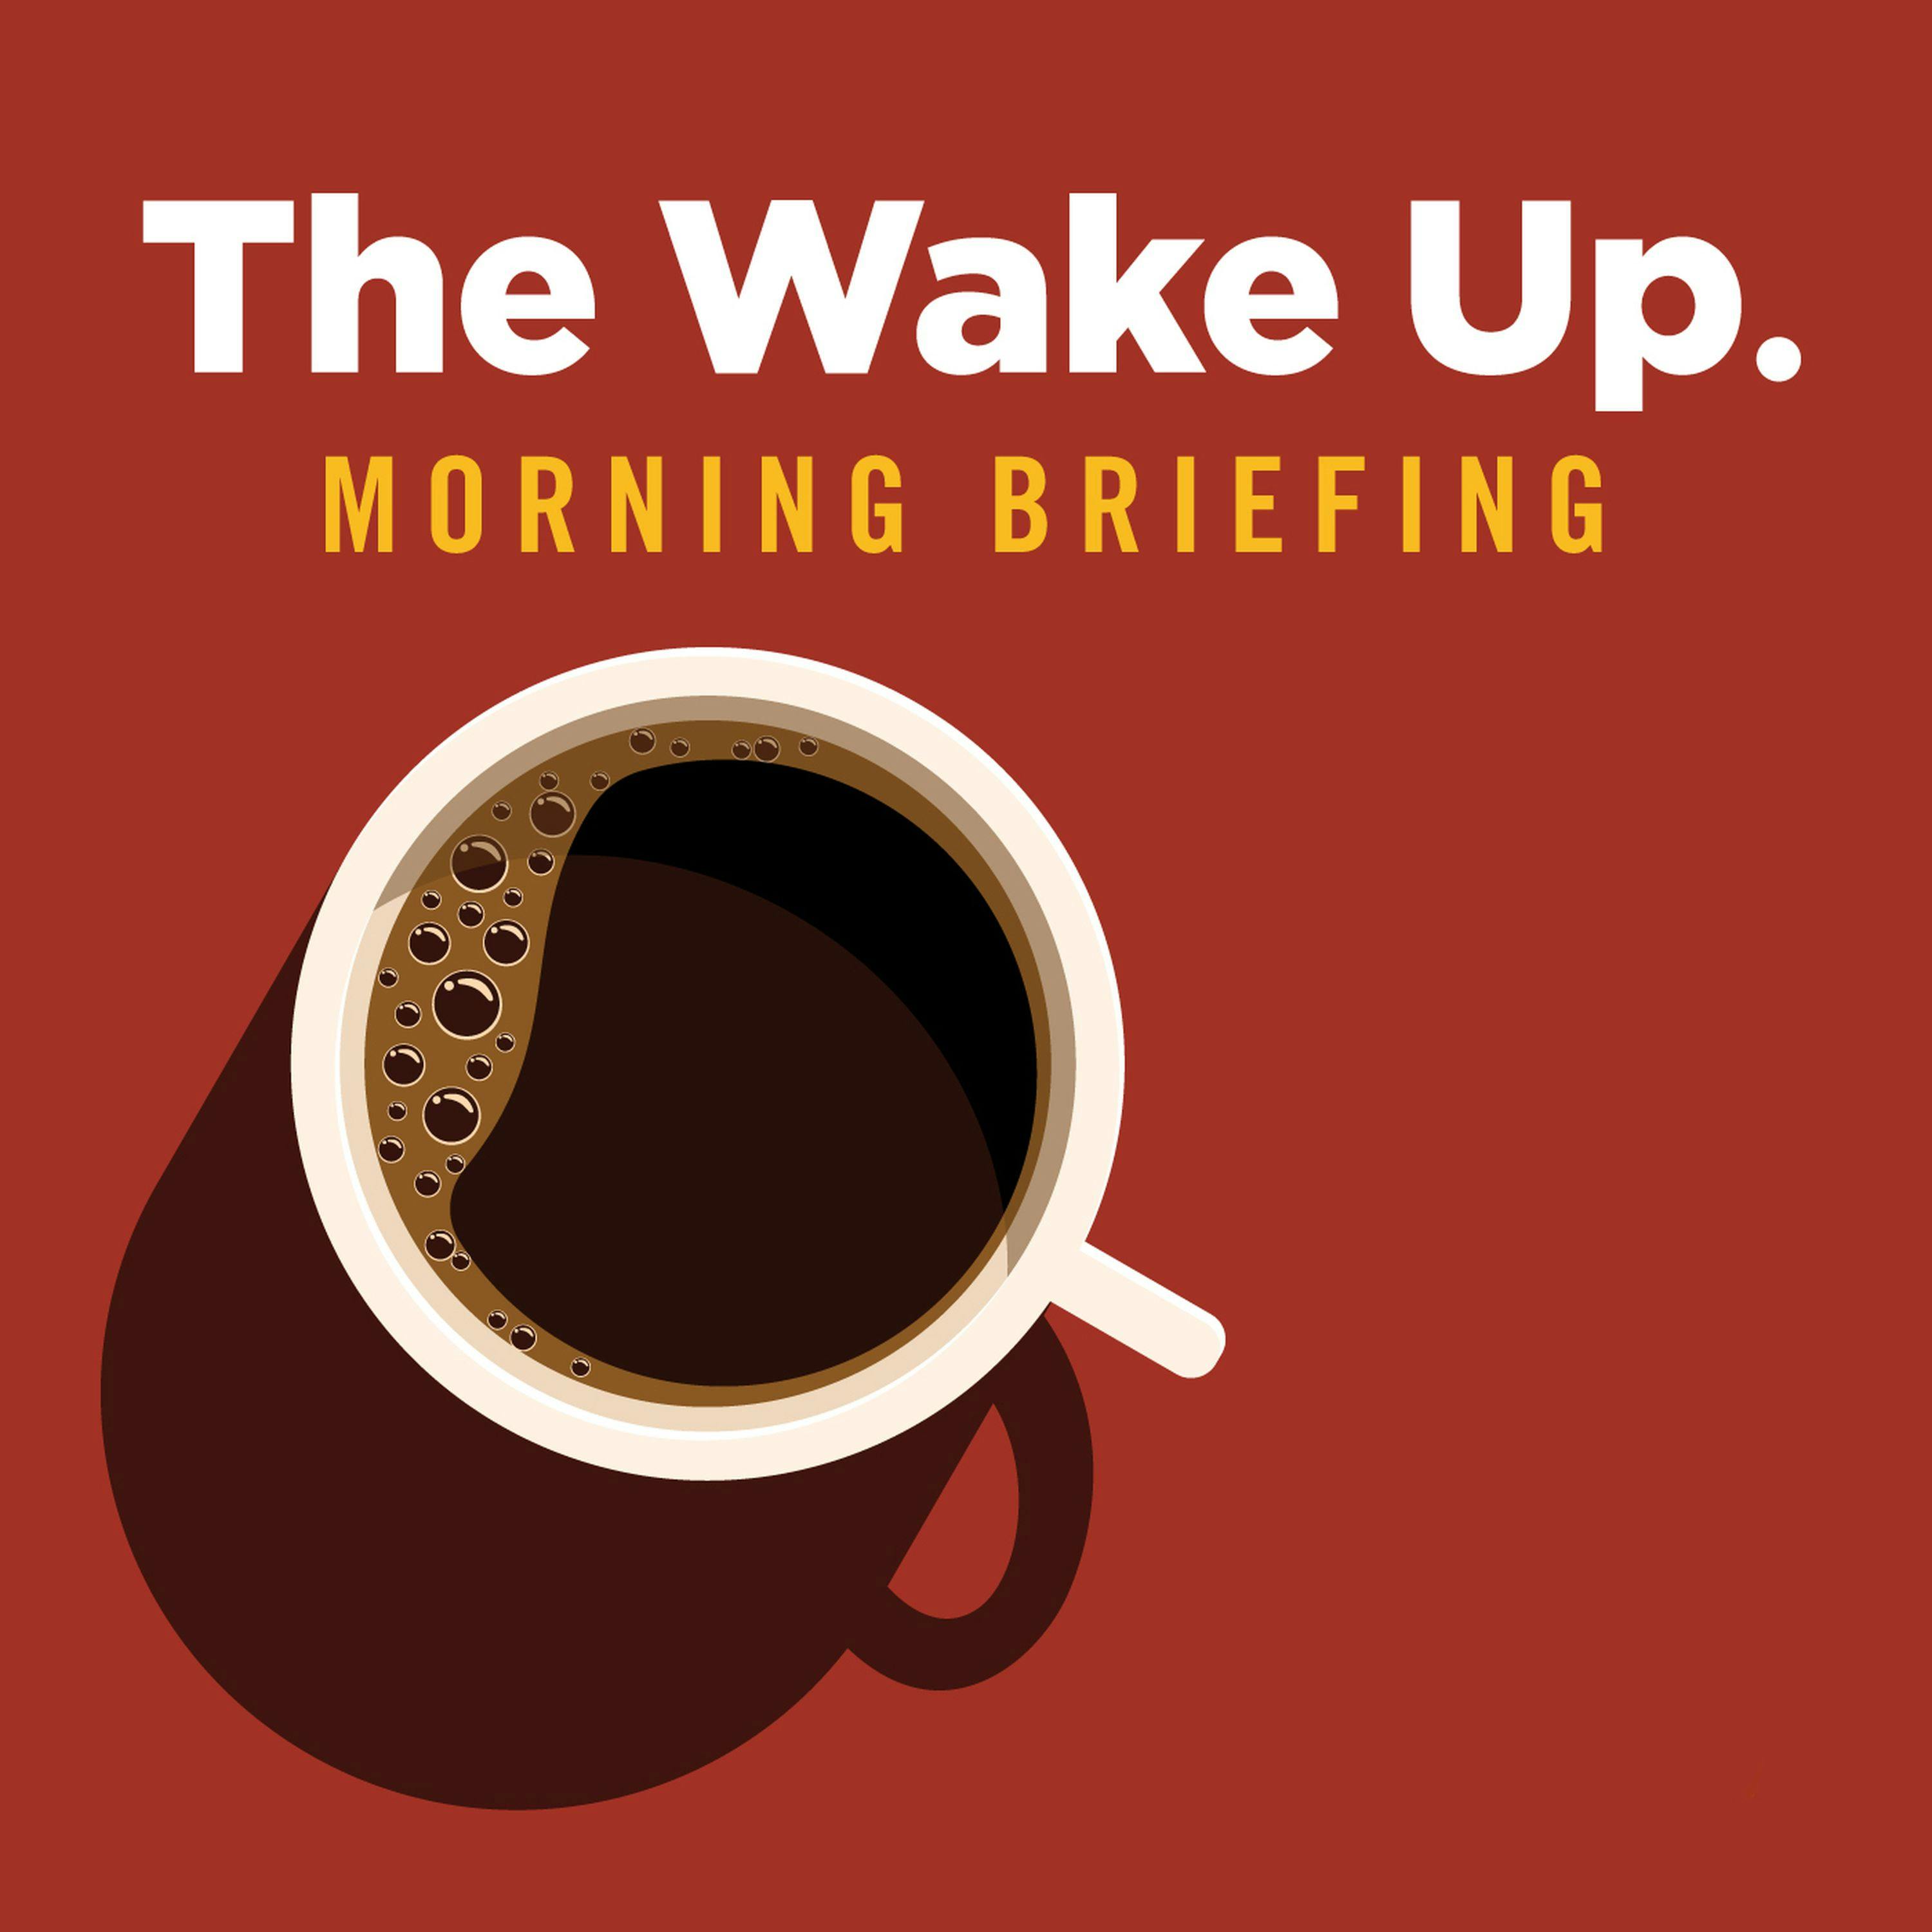 The Wake Up - August m 2020 -- As Ohio legislators balk at ending the corrupt FirstEnergy subsidies, Attorney General Dave Yost might step up